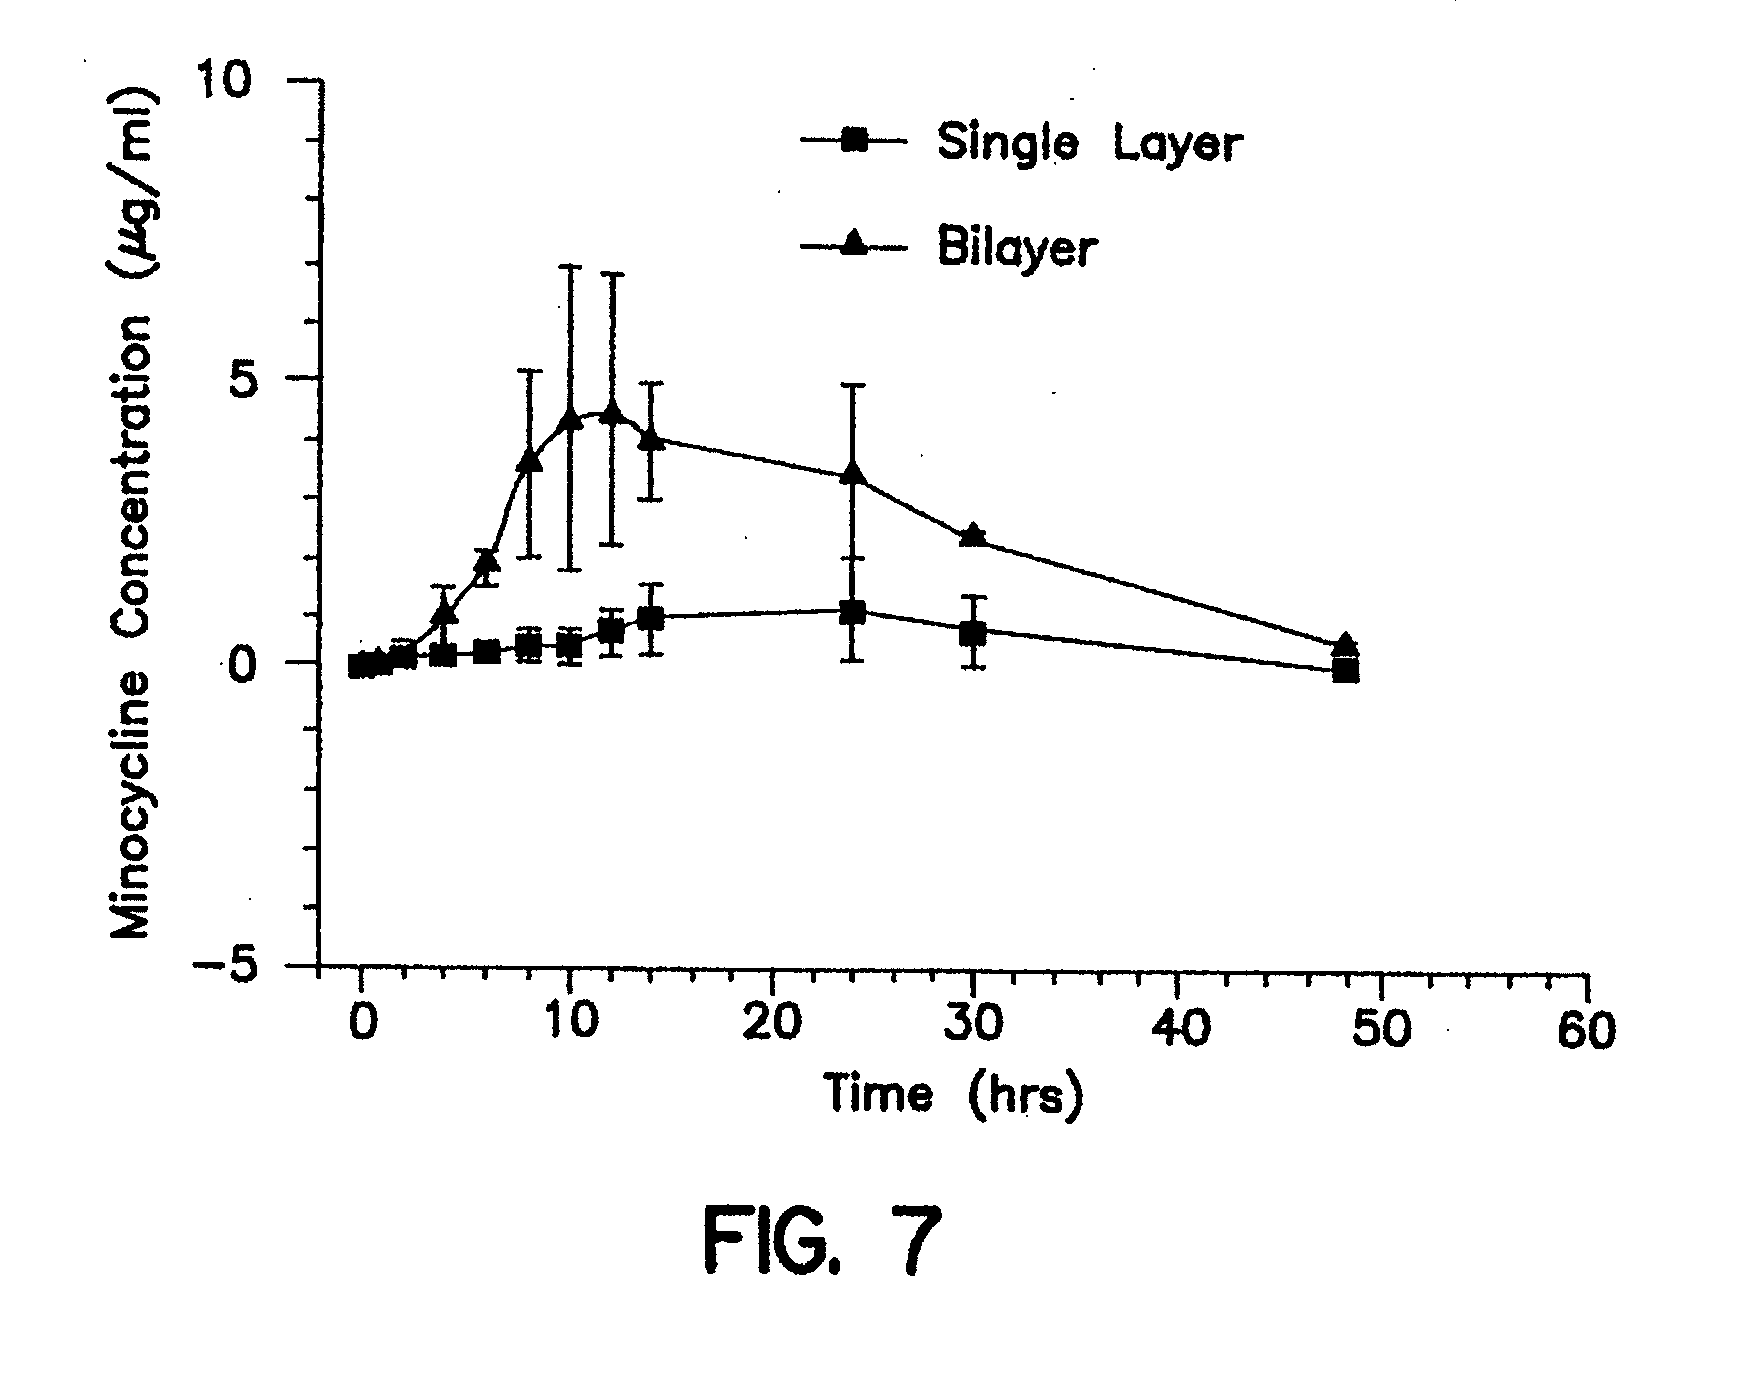 Gastric retention dosage form having multiple layers